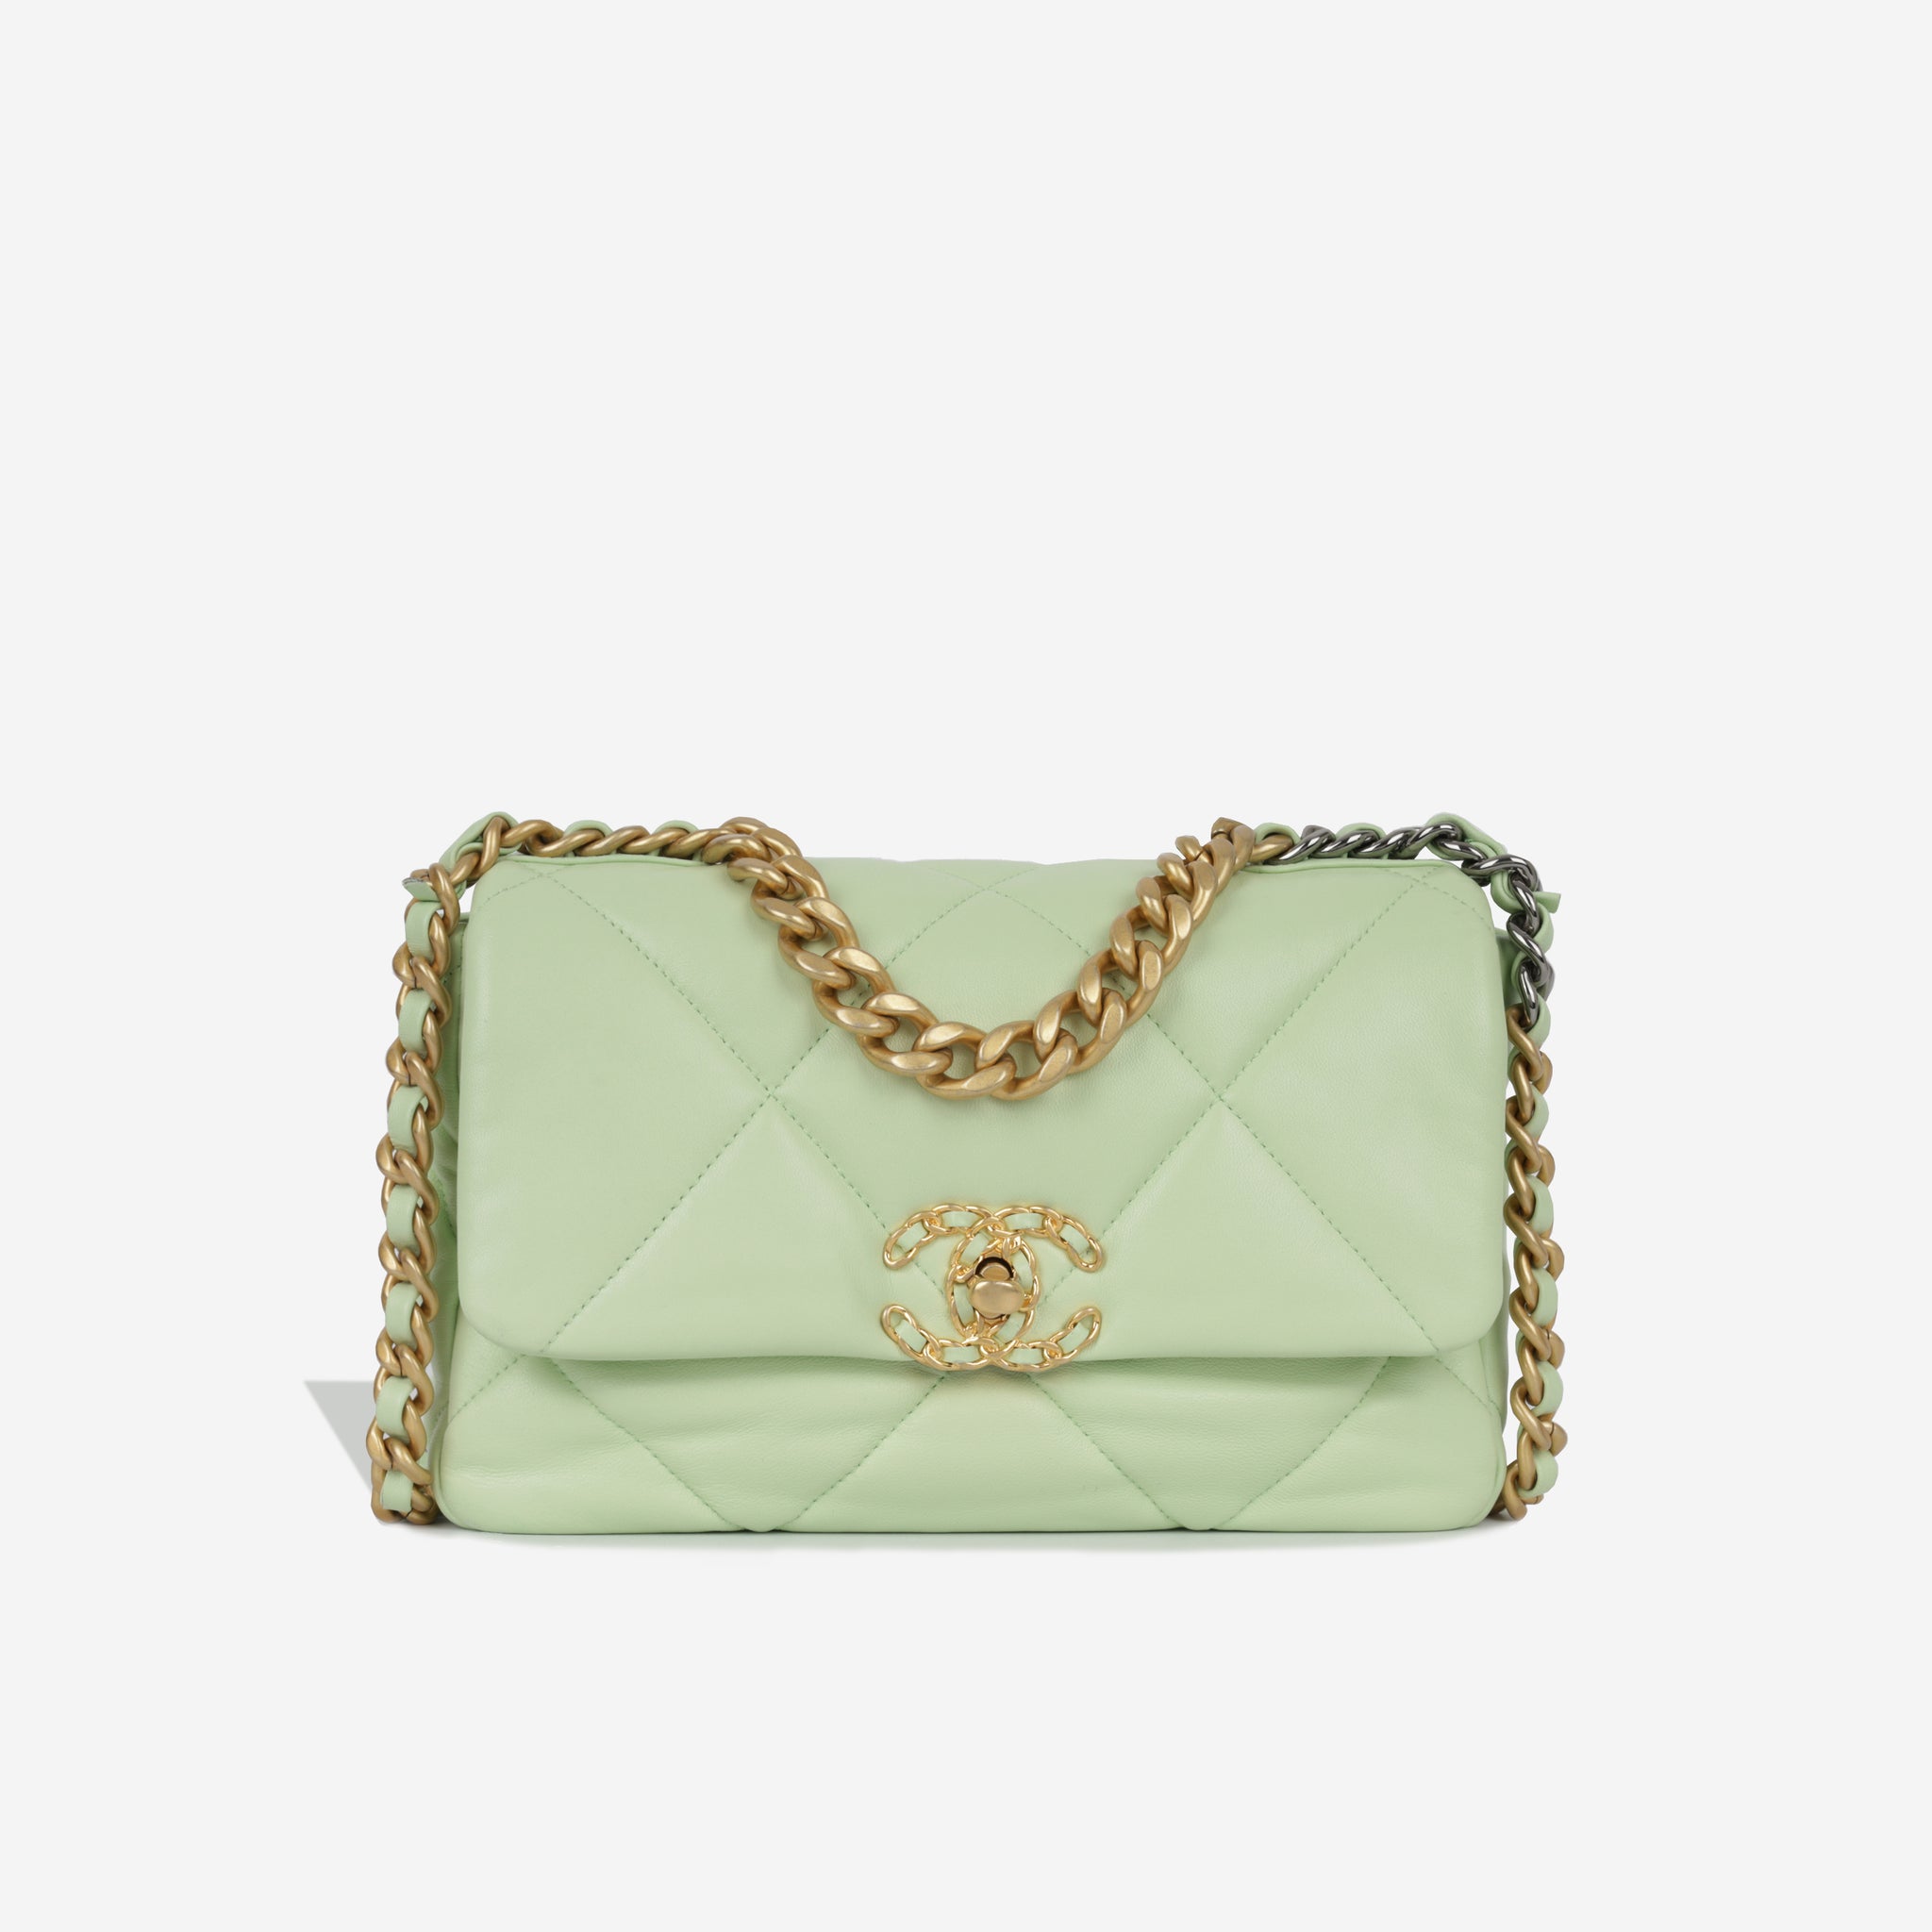 Chanel - Chanel 19 Flap Bag - Small - Mint Green Lambskin - MHW - Plaque